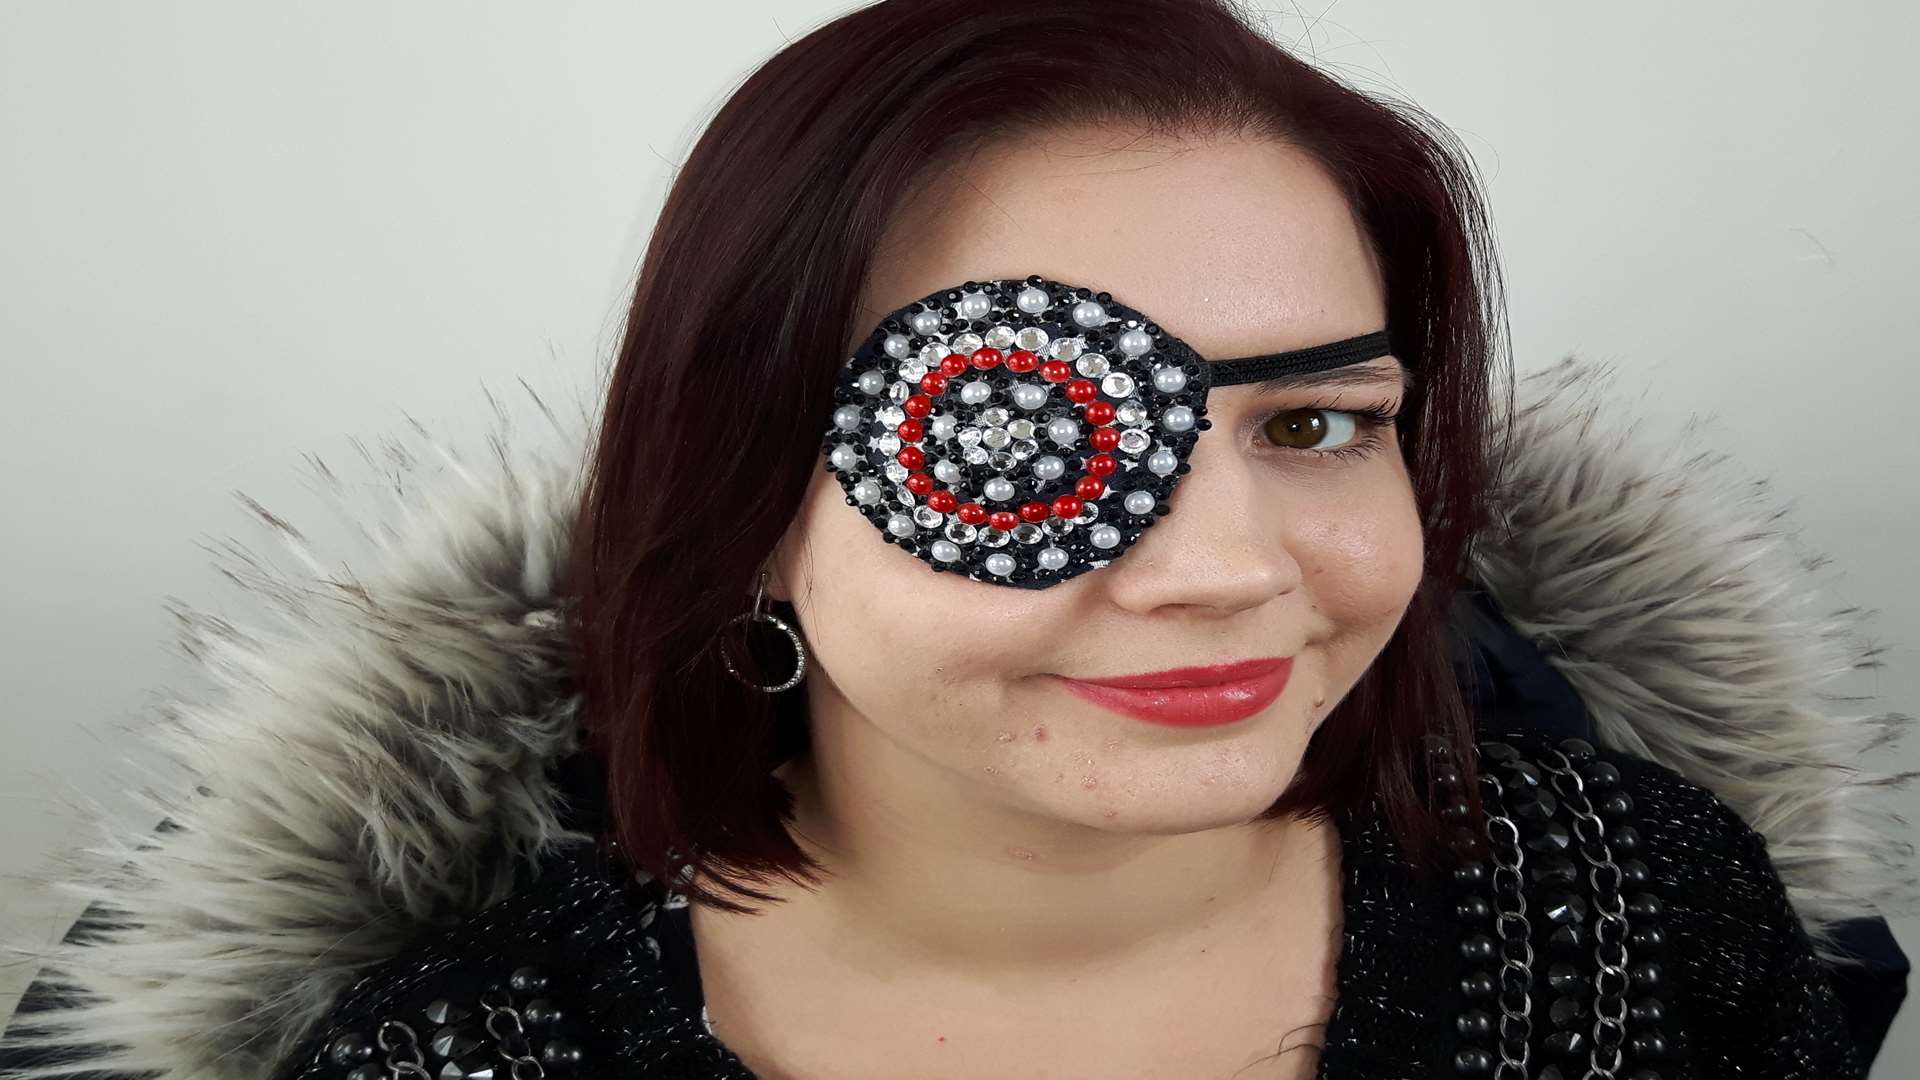 The patches have been good for Toni's self confidence